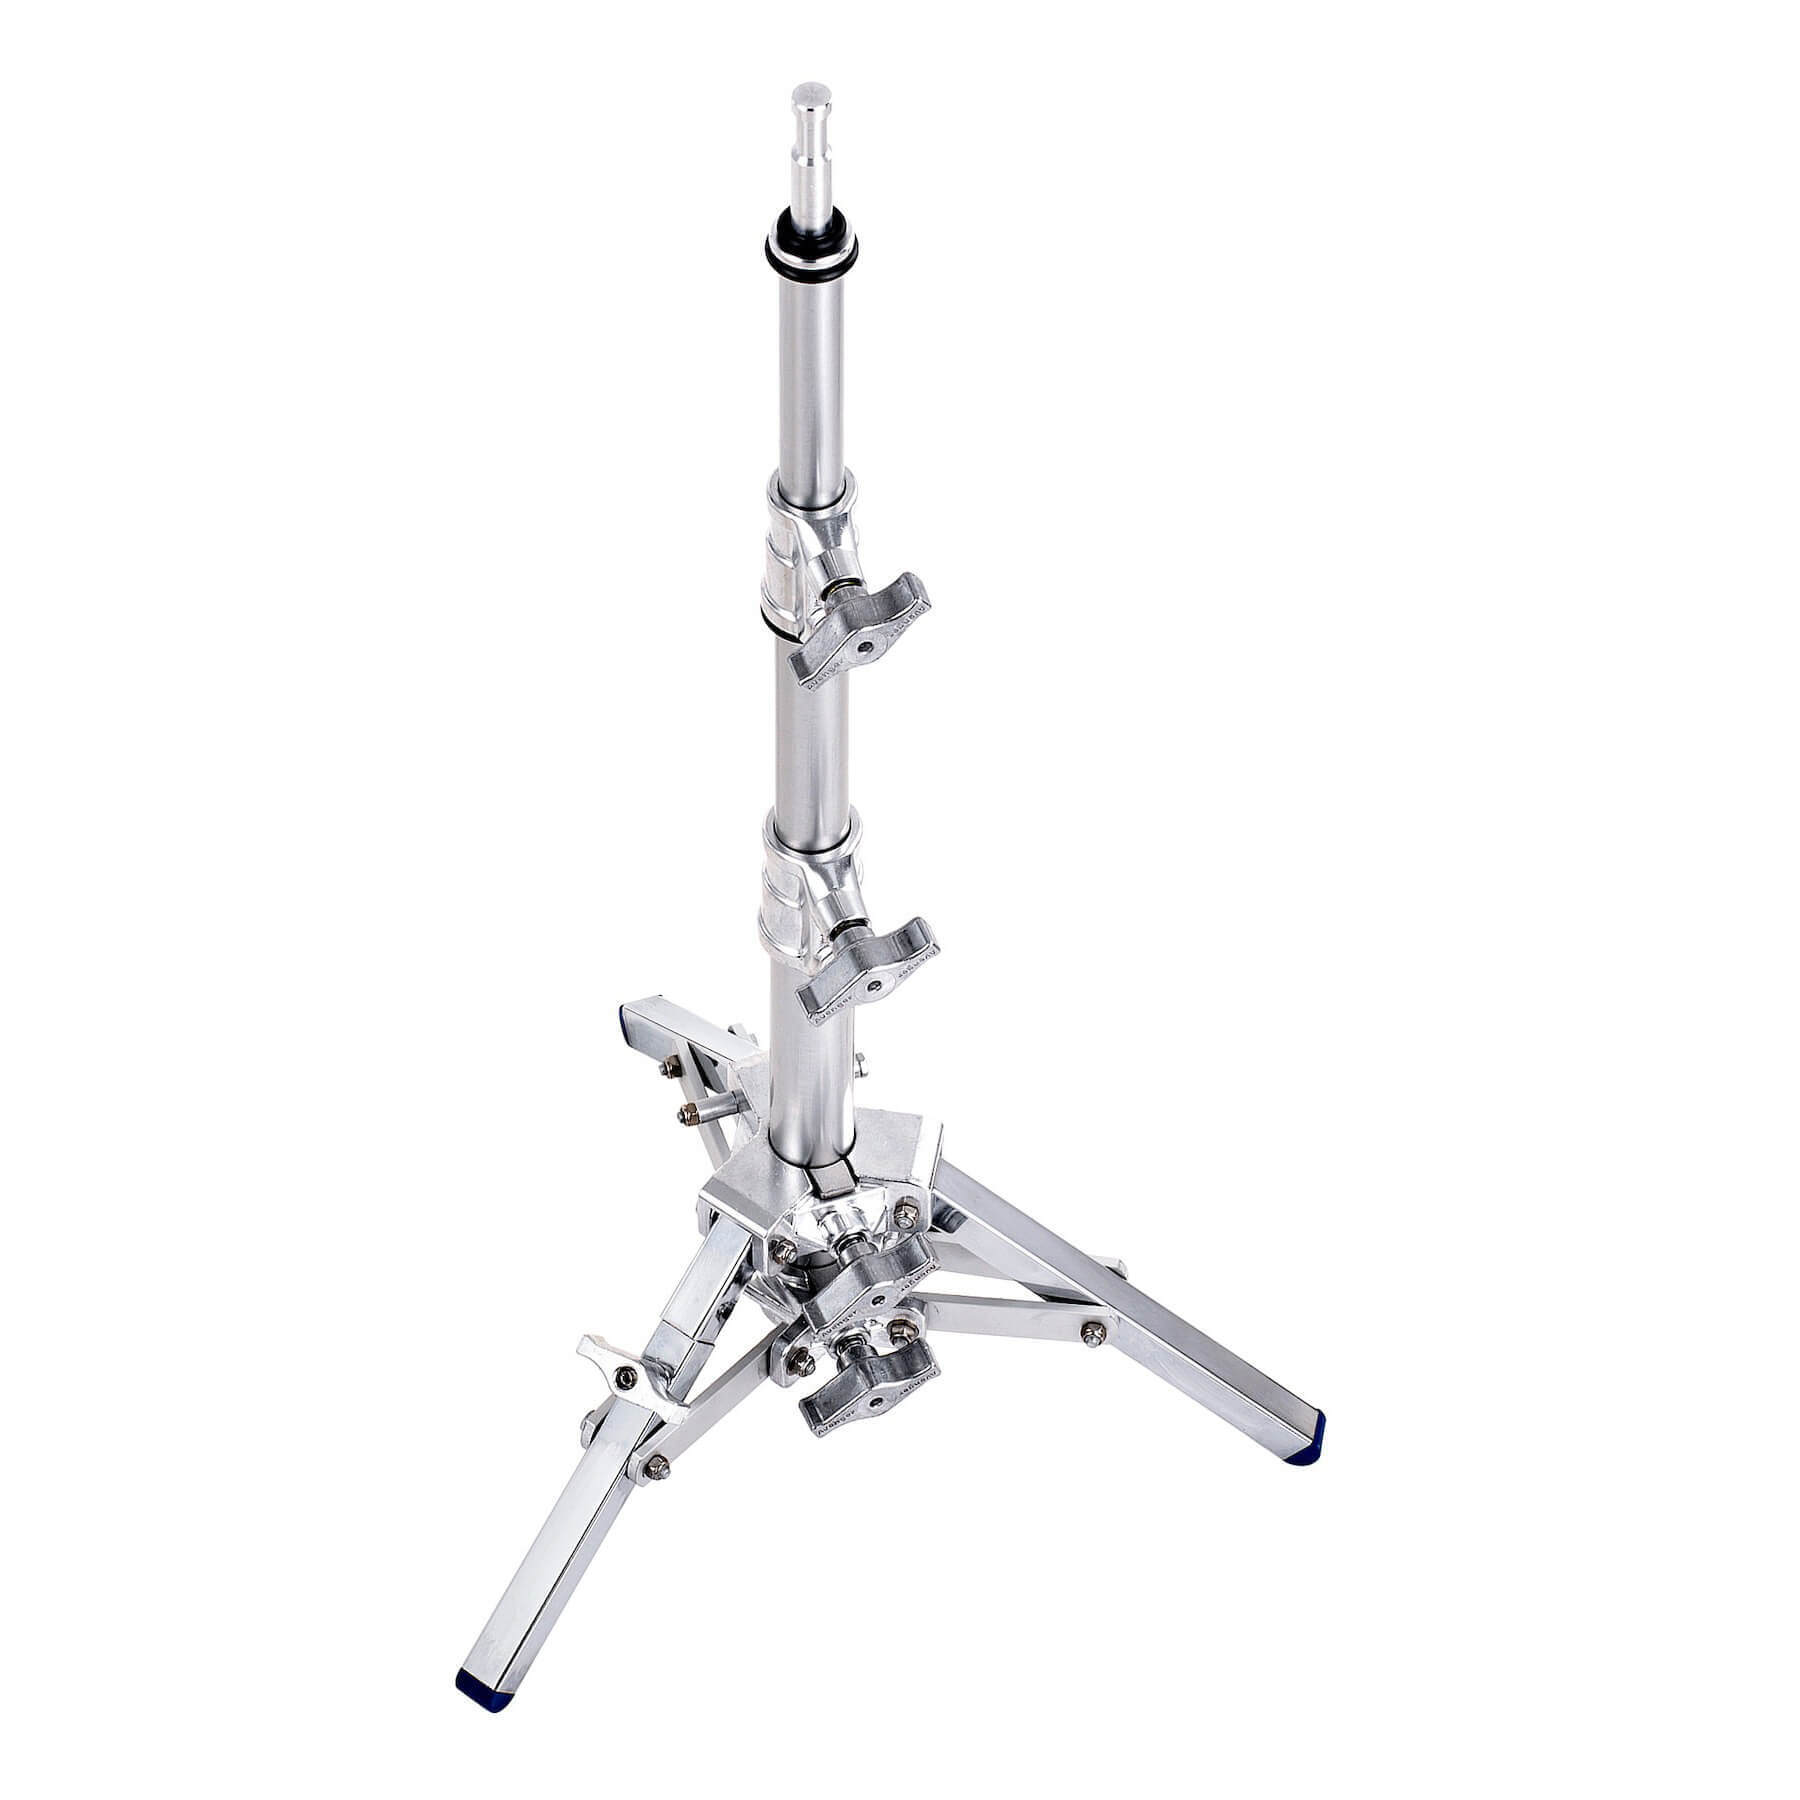 Photo/ Video Lighting Tripod BABY STAND 10 A0010, Silver